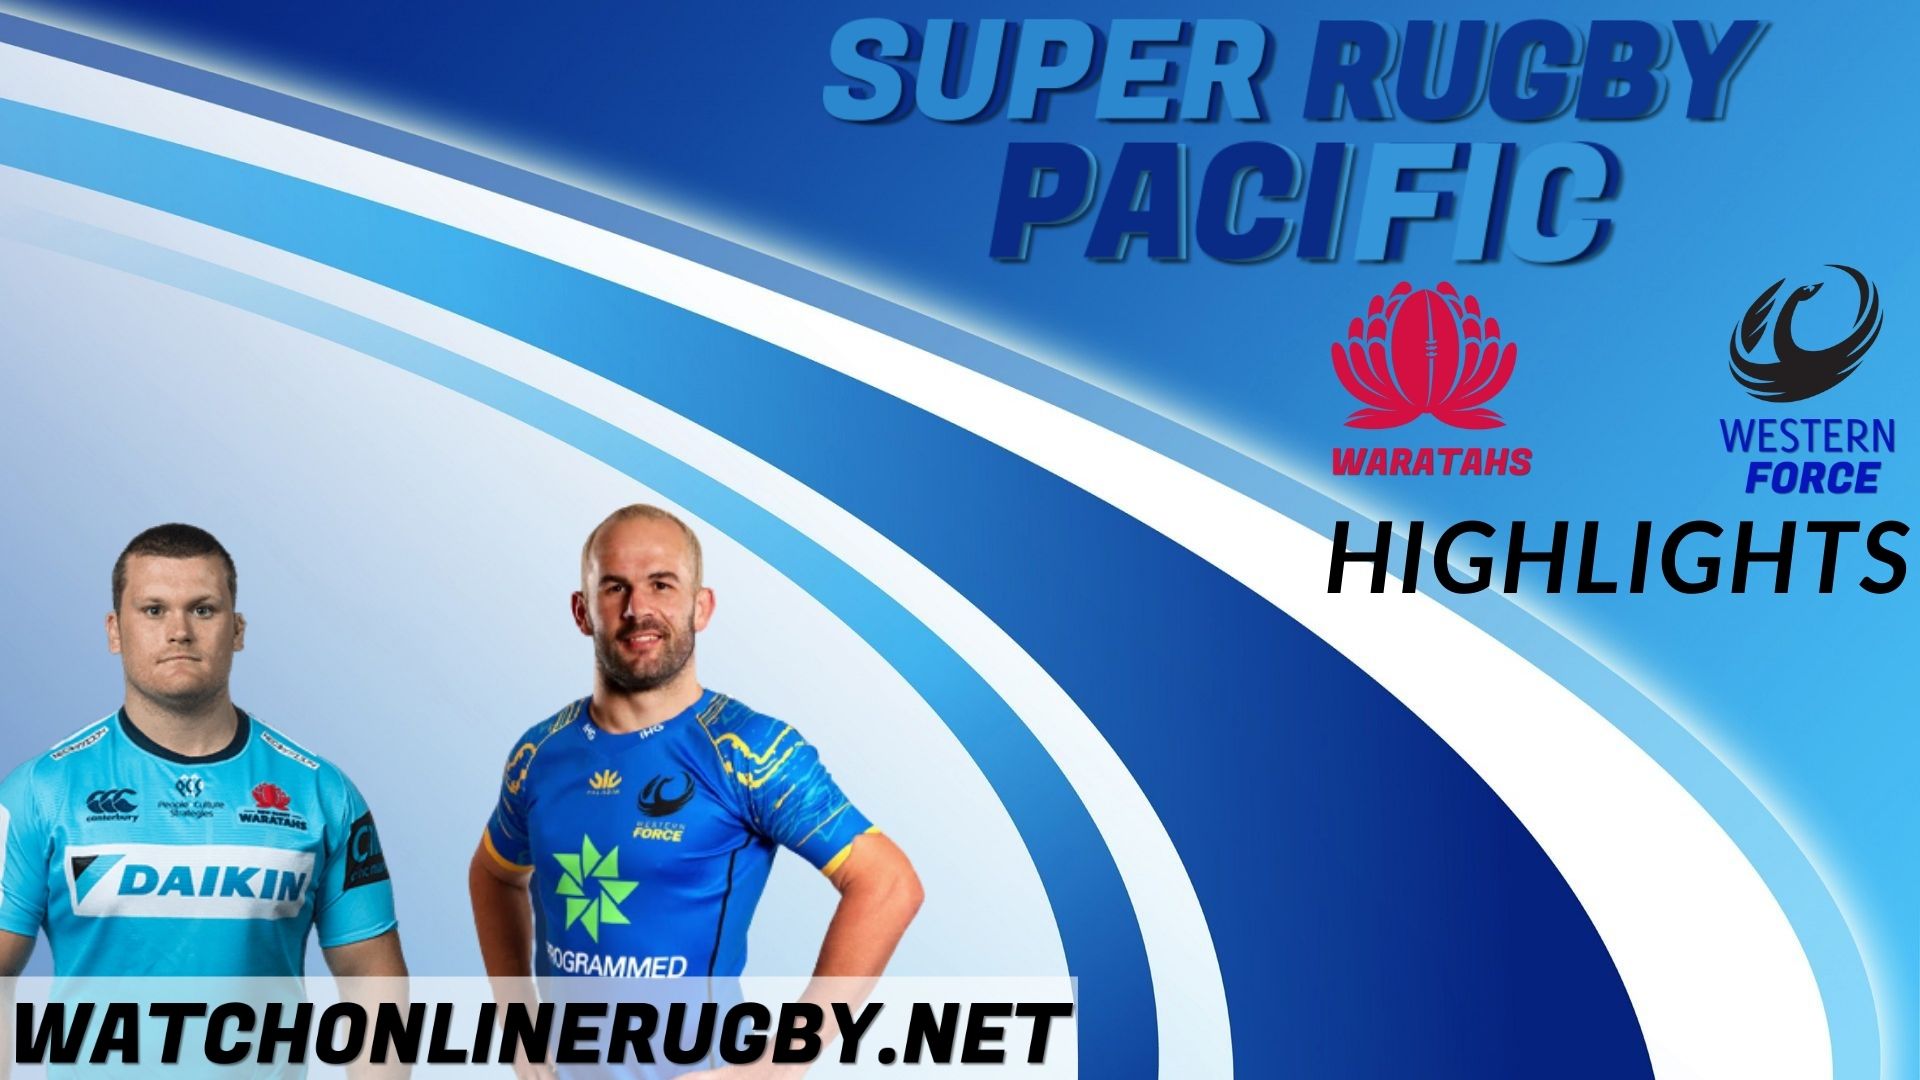 NSW Waratahs Vs Western Force Super Rugby Pacific 2022 RD 4